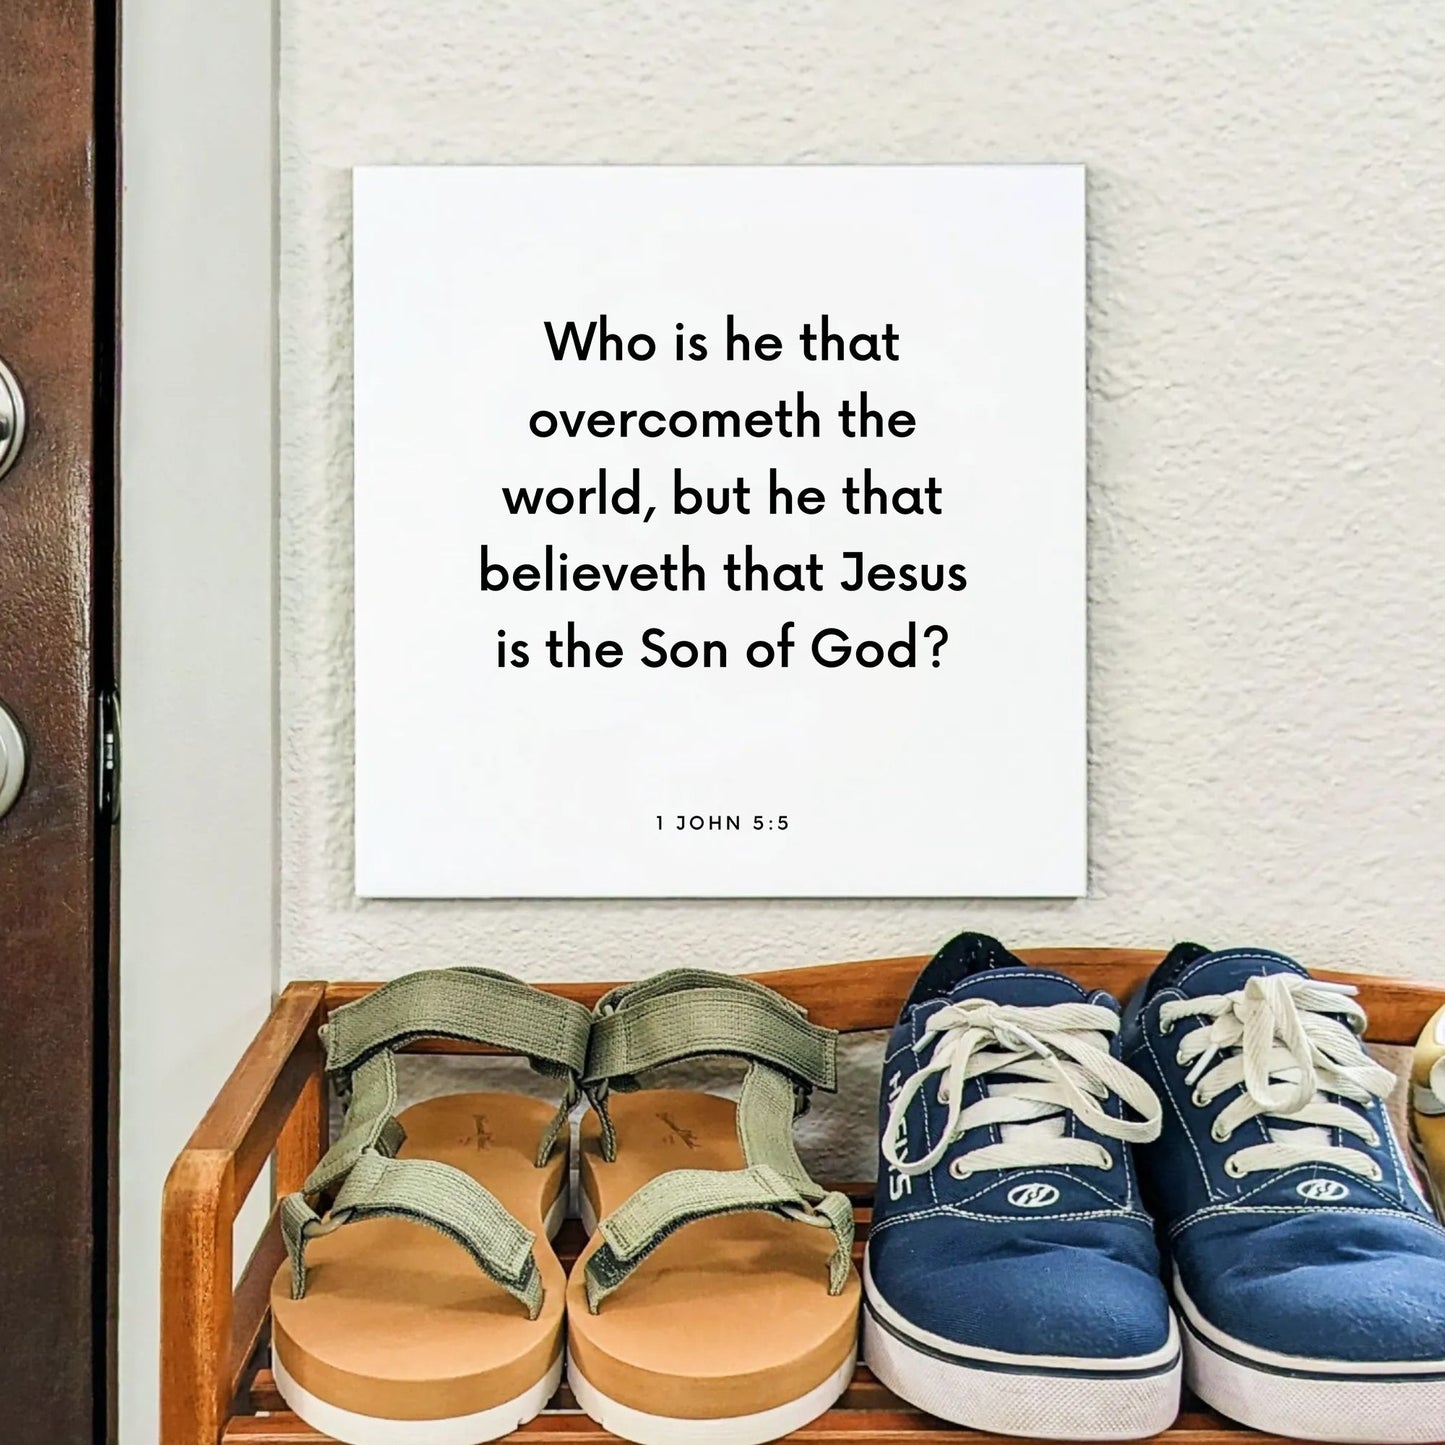 Shoes mouting of the scripture tile for 1 John 5:5 - "Who is he that overcometh the world, but he that believeth"